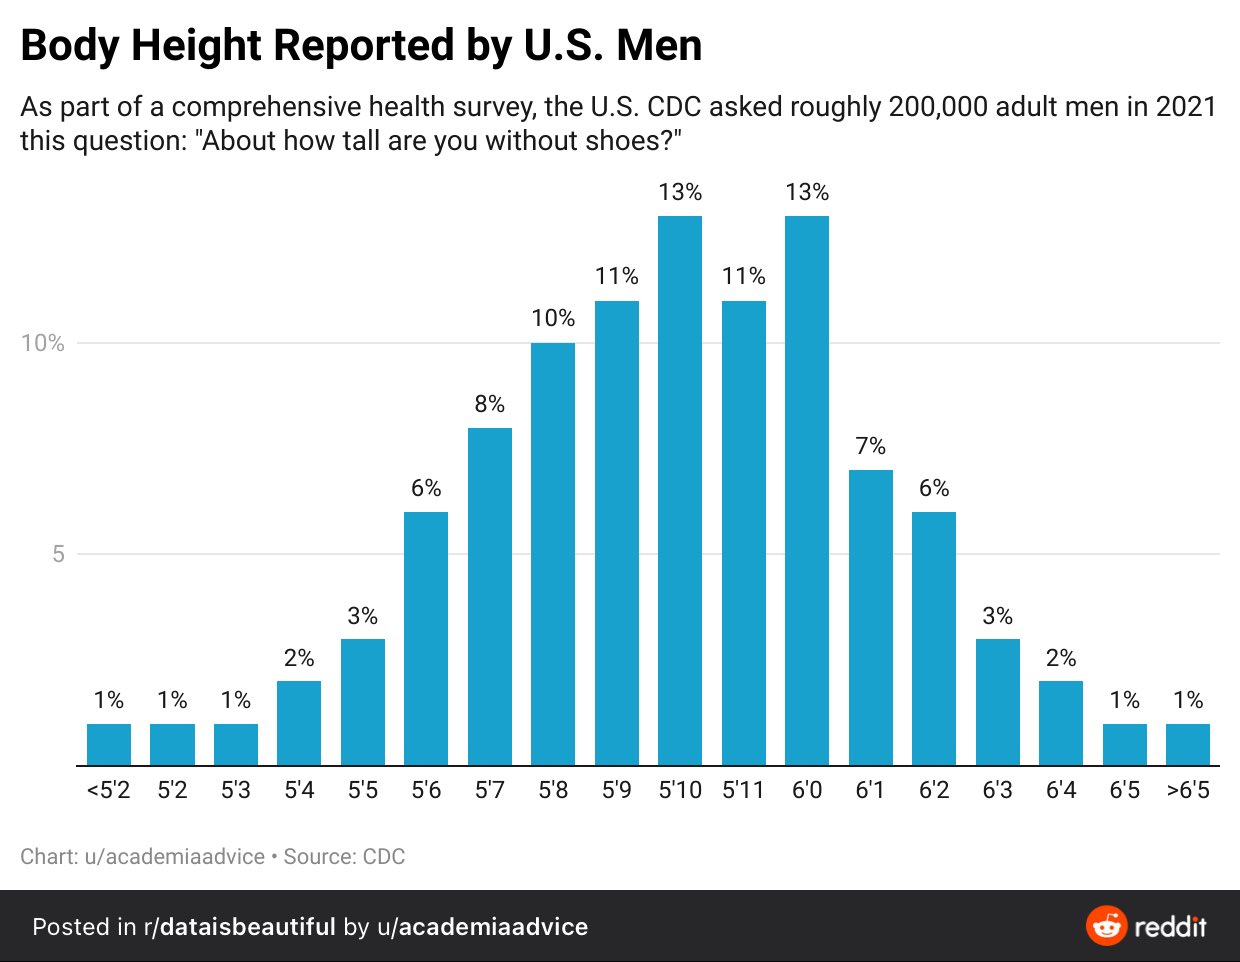 Rob Henderson on X: In the U.S., only 14.5 percent of men are 6